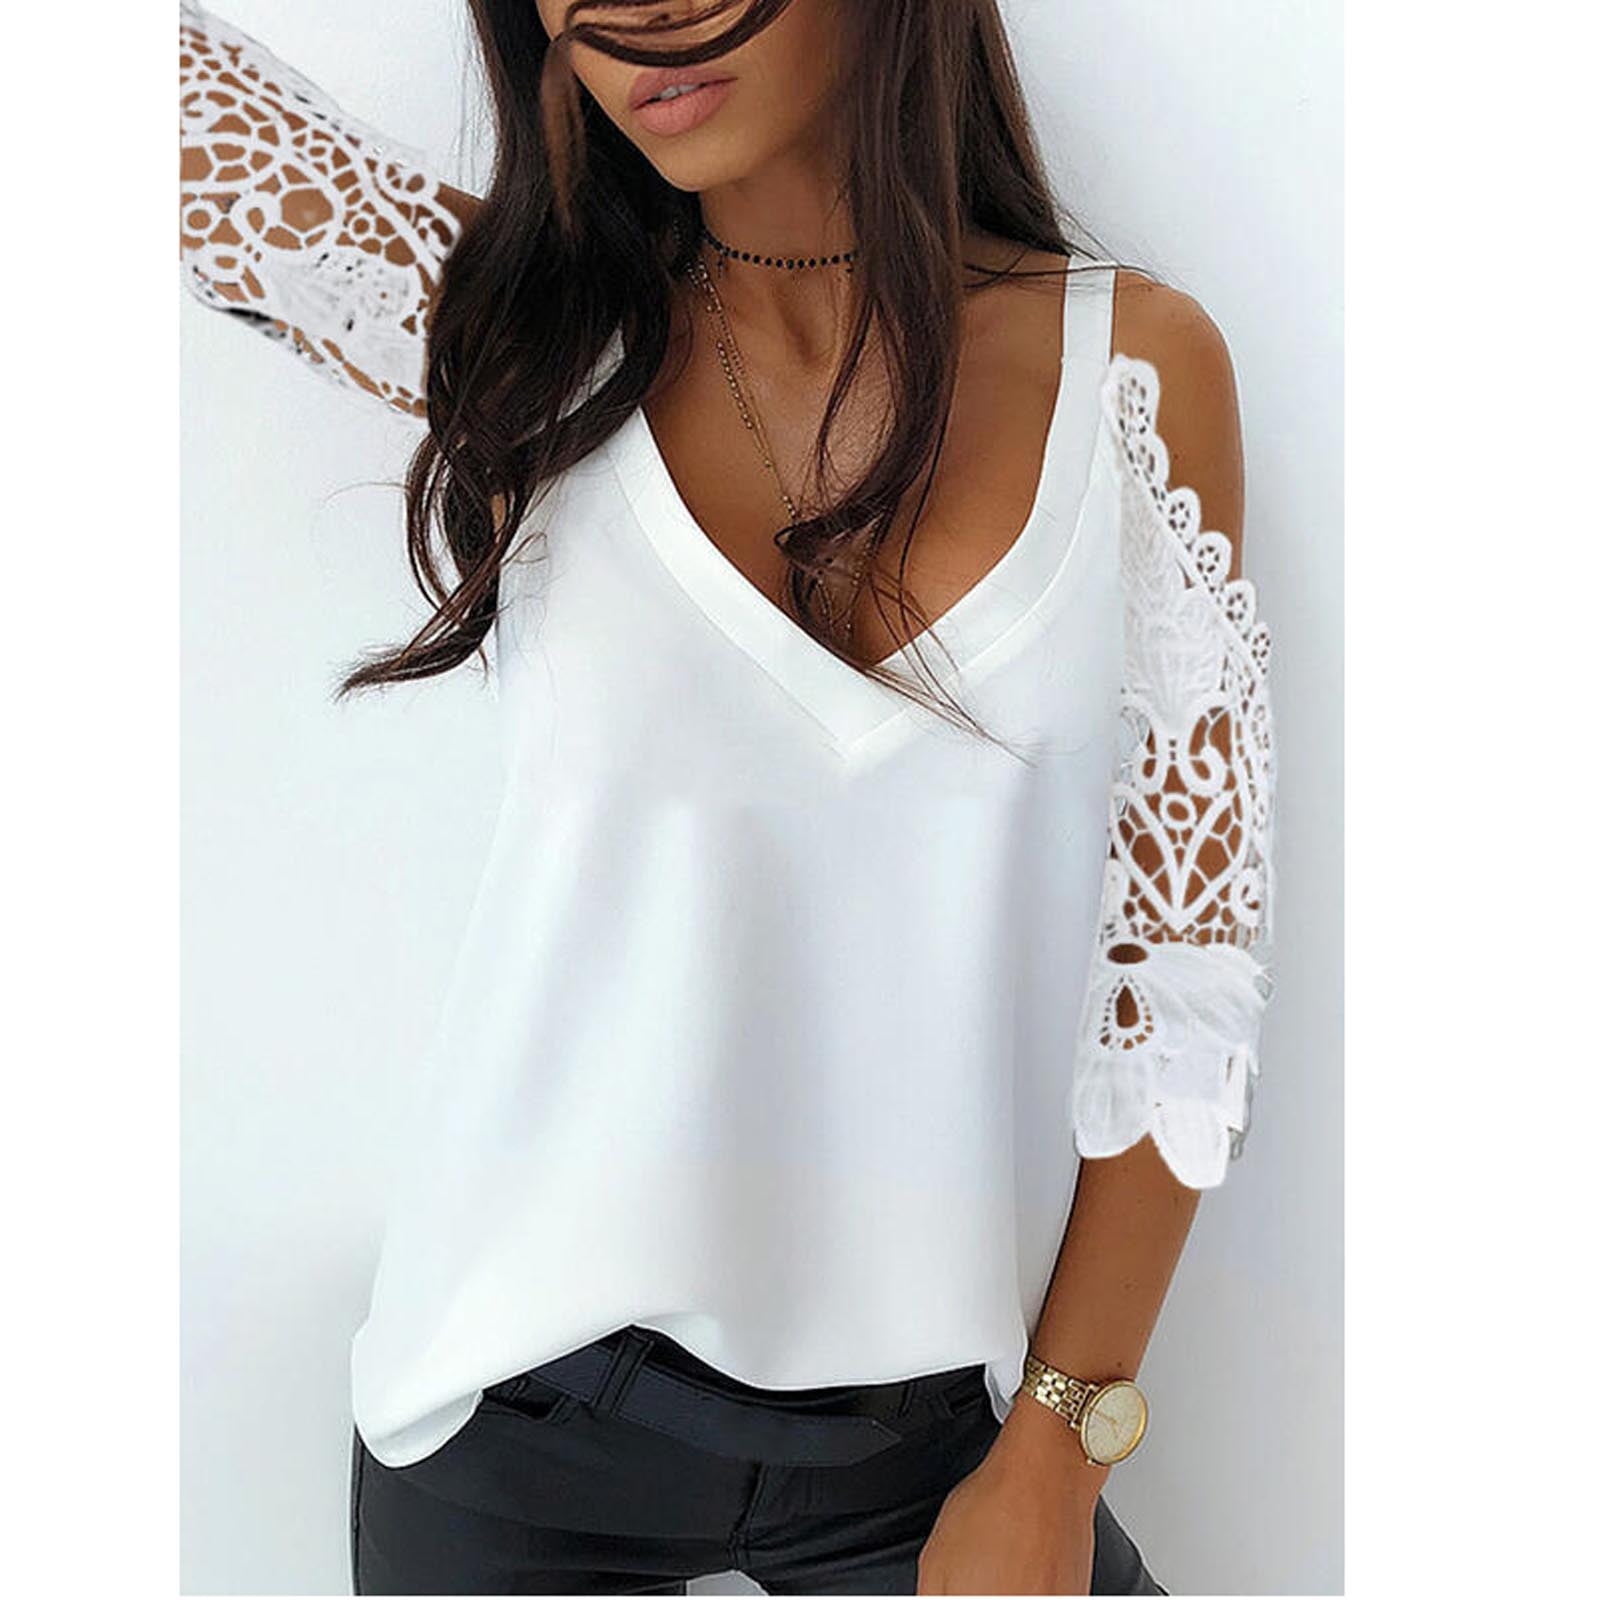 LoyisViDion Womans Shirts Clearance Fashion Short Sleeve Solid Blouse ...